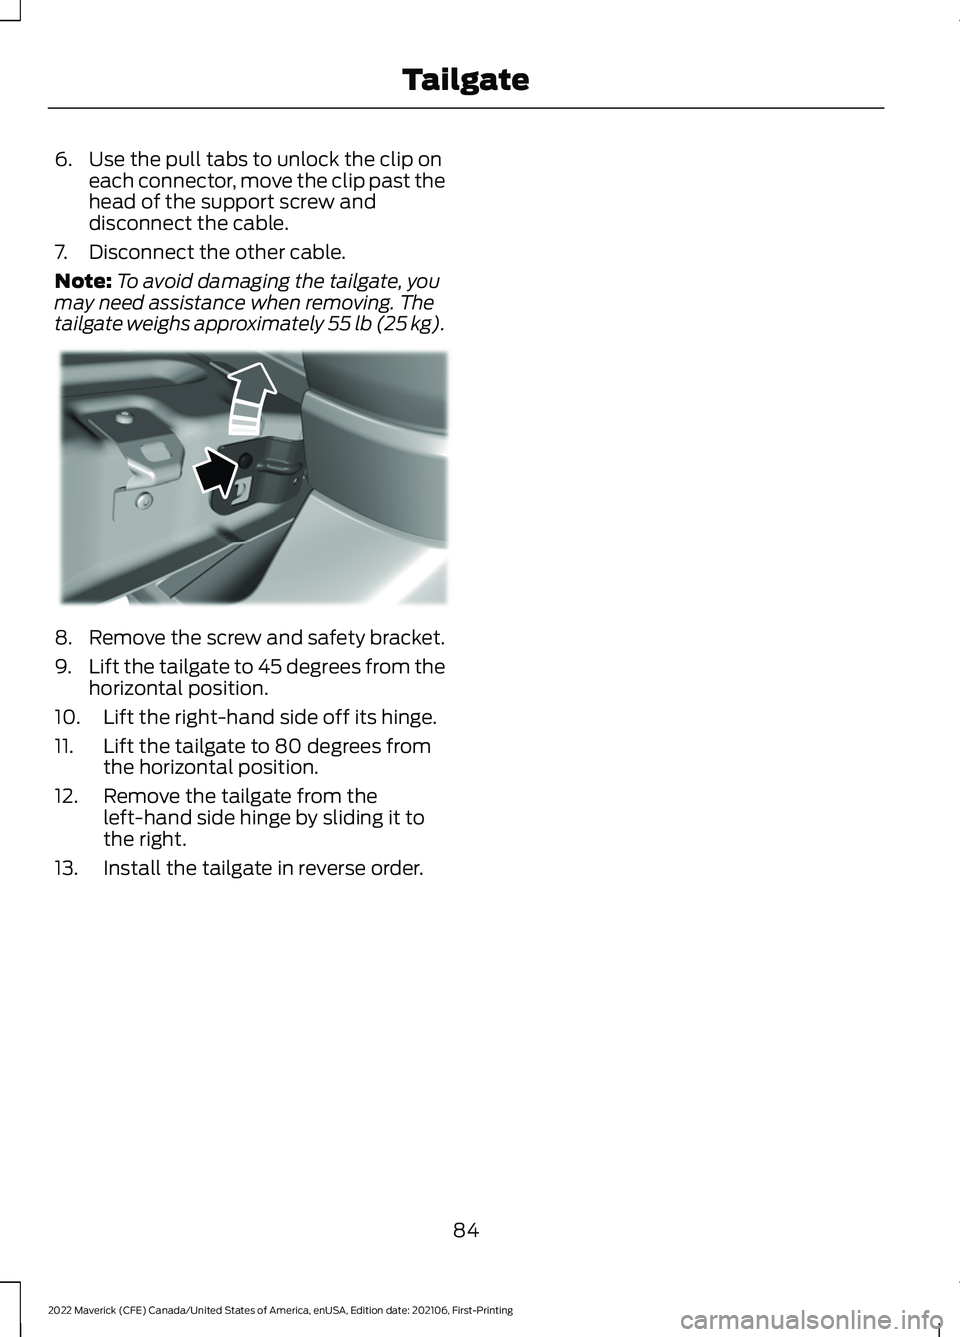 FORD MAVERICK 2022  Owners Manual 6. Use the pull tabs to unlock the clip on
each connector, move the clip past the
head of the support screw and
disconnect the cable.
7. Disconnect the other cable.
Note: To avoid damaging the tailgat